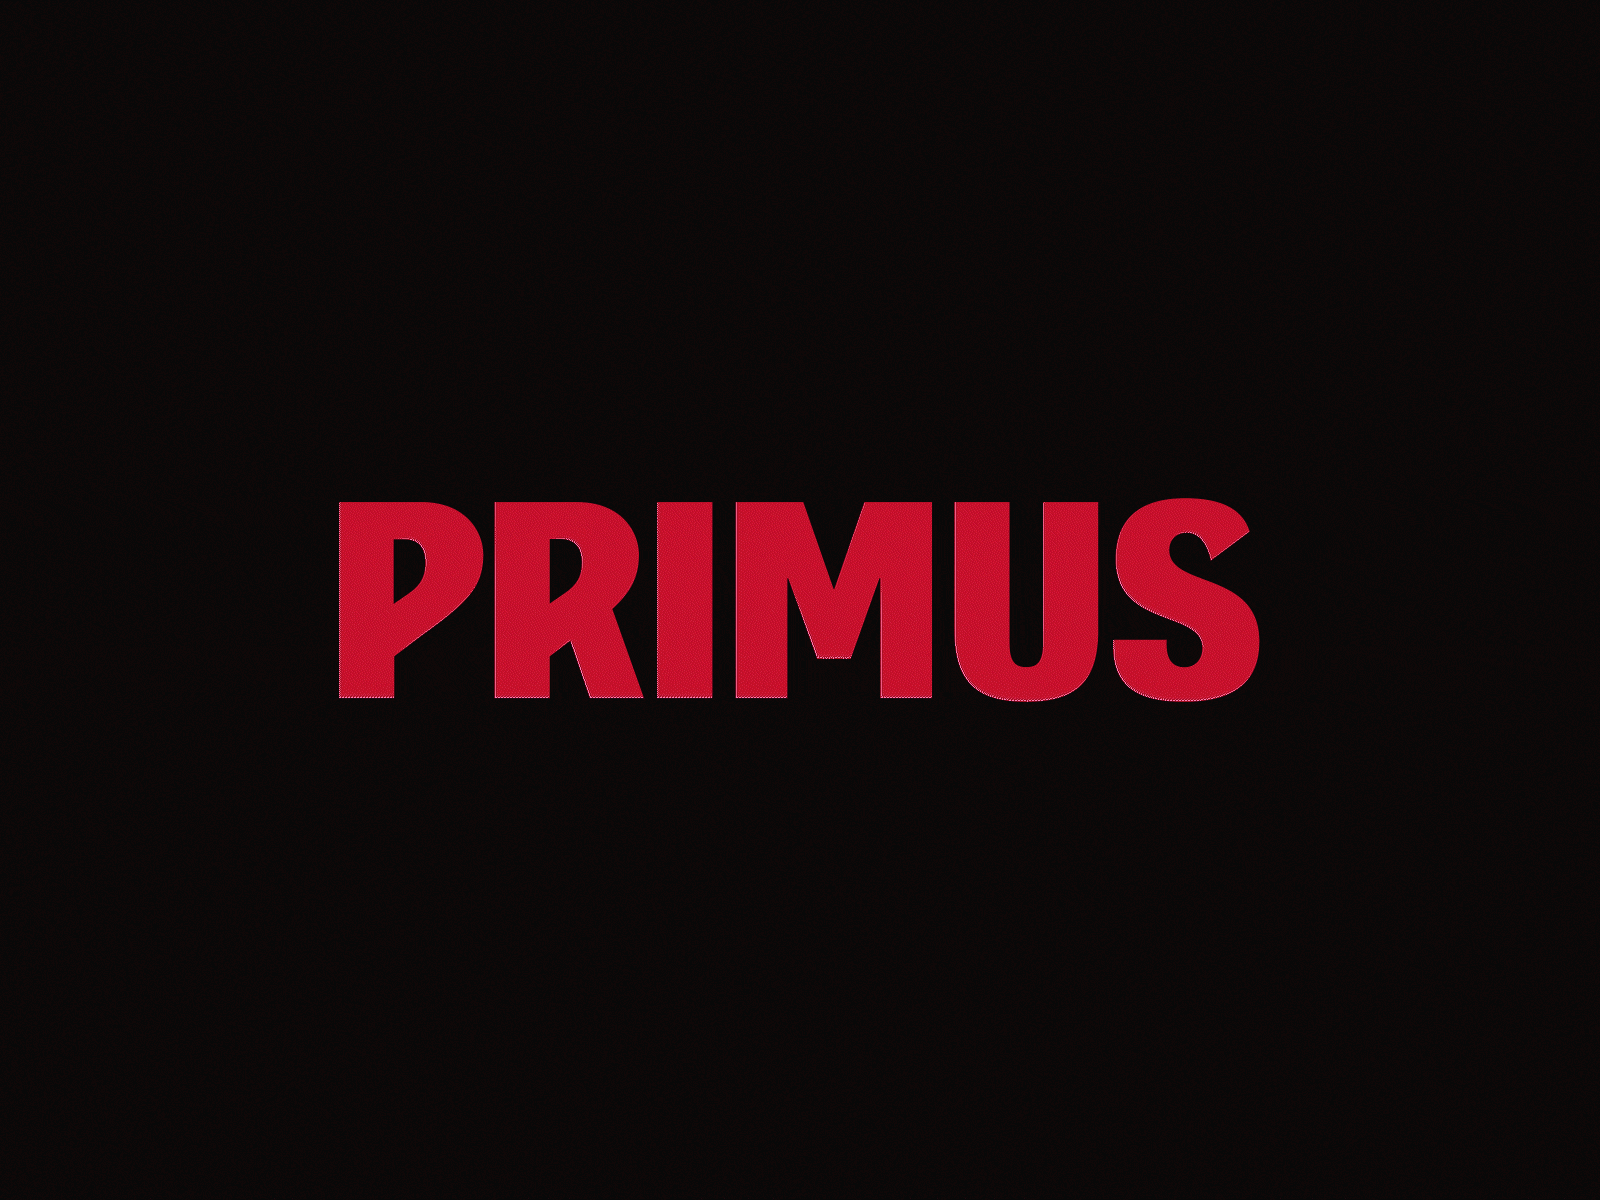 Primus after effects animation brand branding design logo logo reveal neon neon light primus red reveal trim path